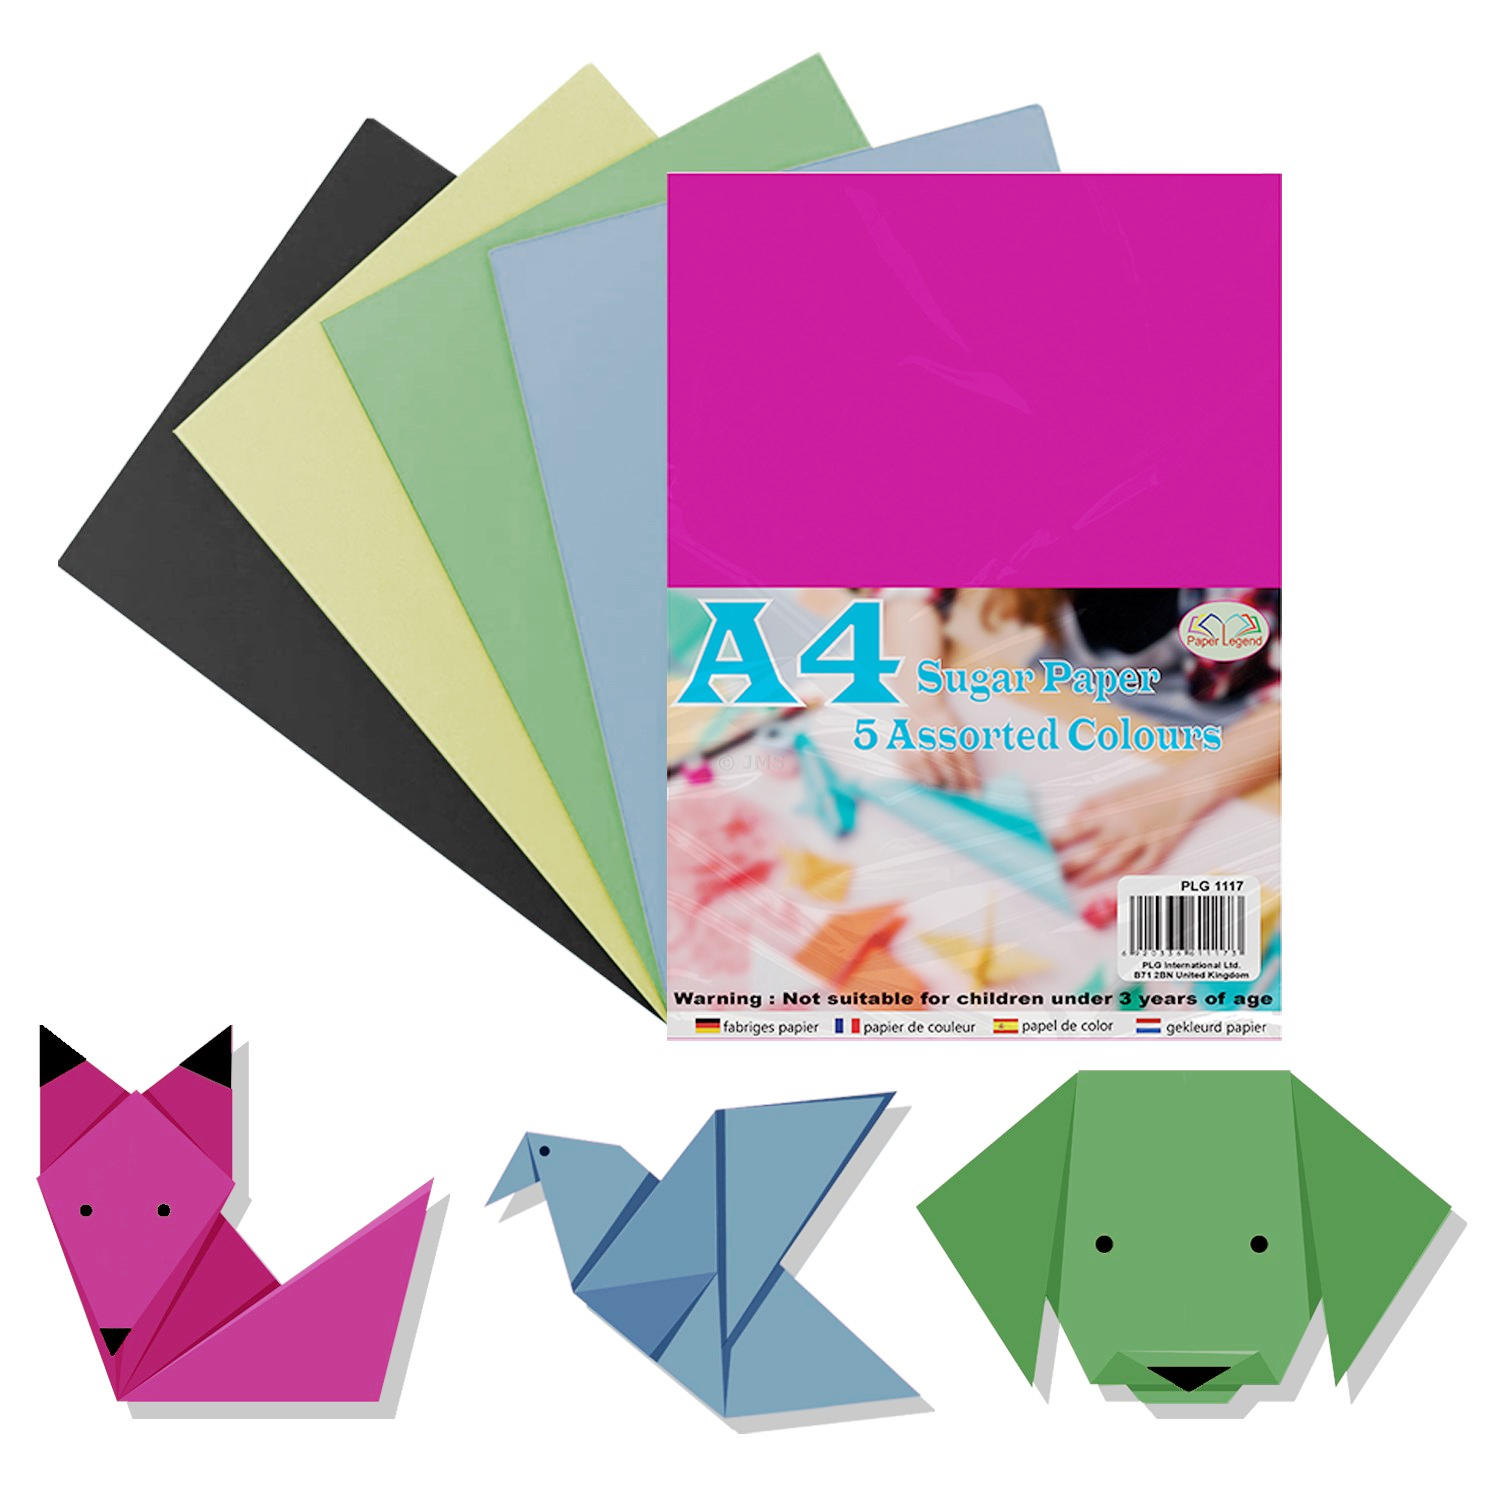 A4 Sugar Paper 100 Coloured Sheets Home School Kid's Activities Art Craft Origami 